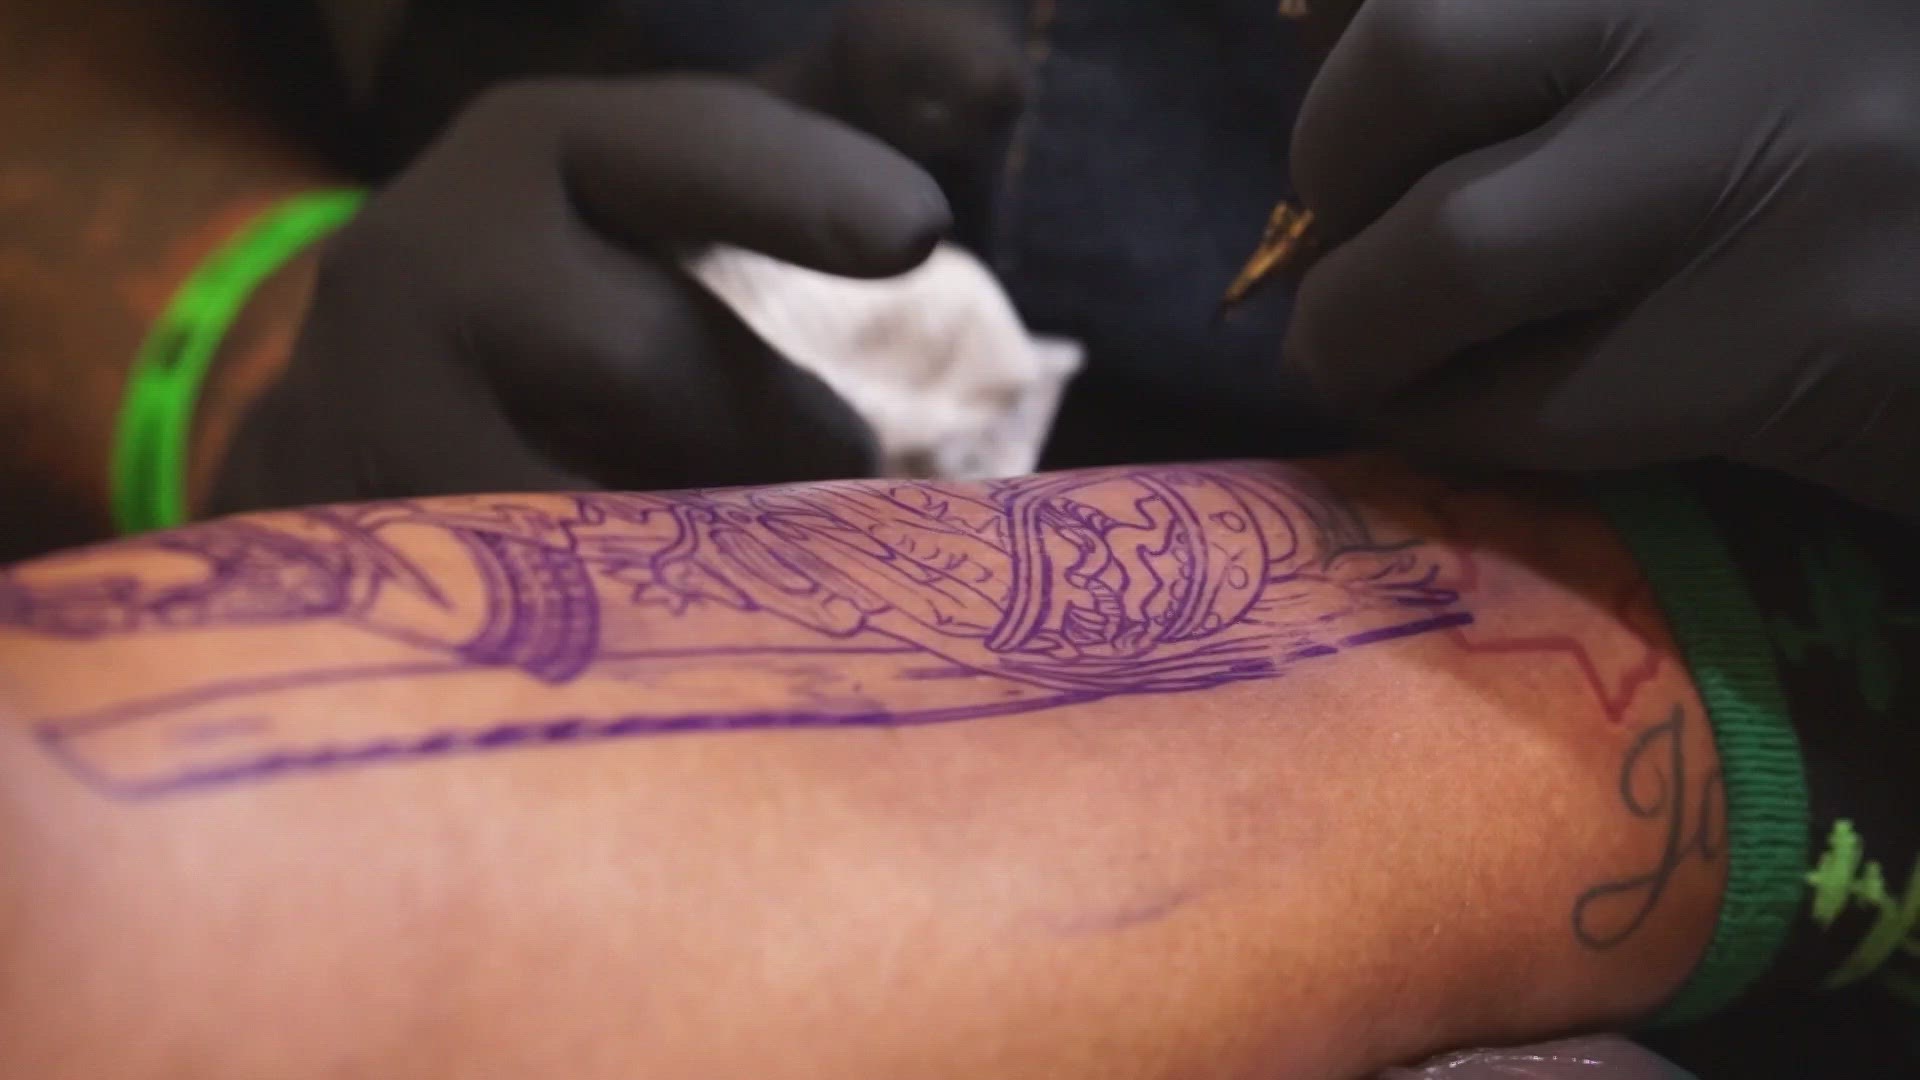 Can't commit to a permanent tattoo? This shop might be your best alternative.